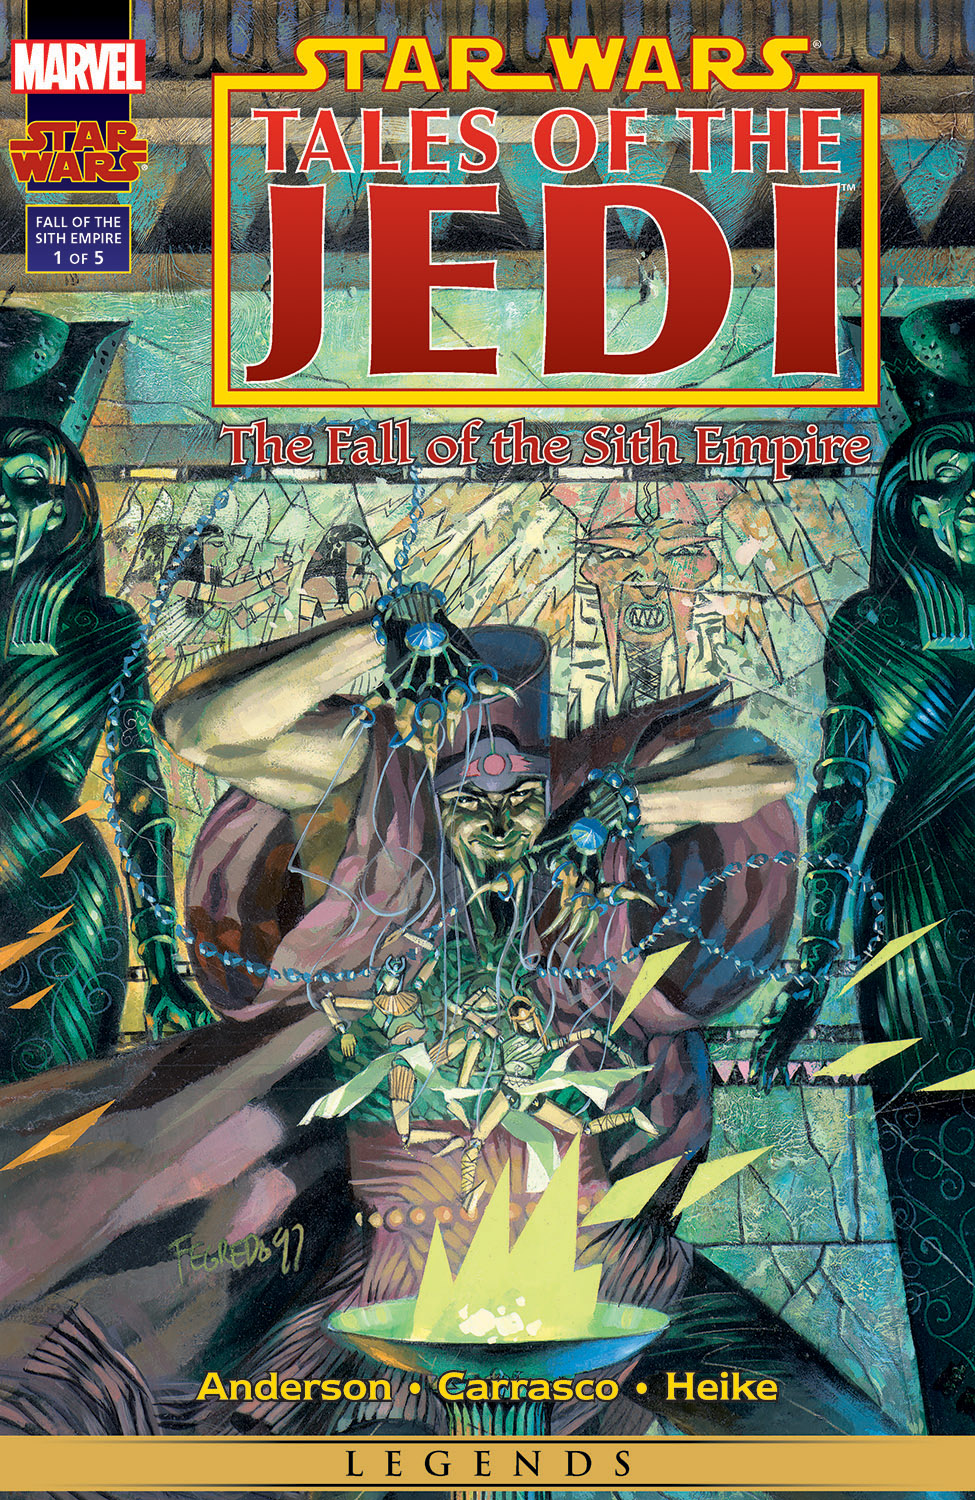 Star Wars: Tales of the Jedi - The Fall of the Sith Empire (1997) #1